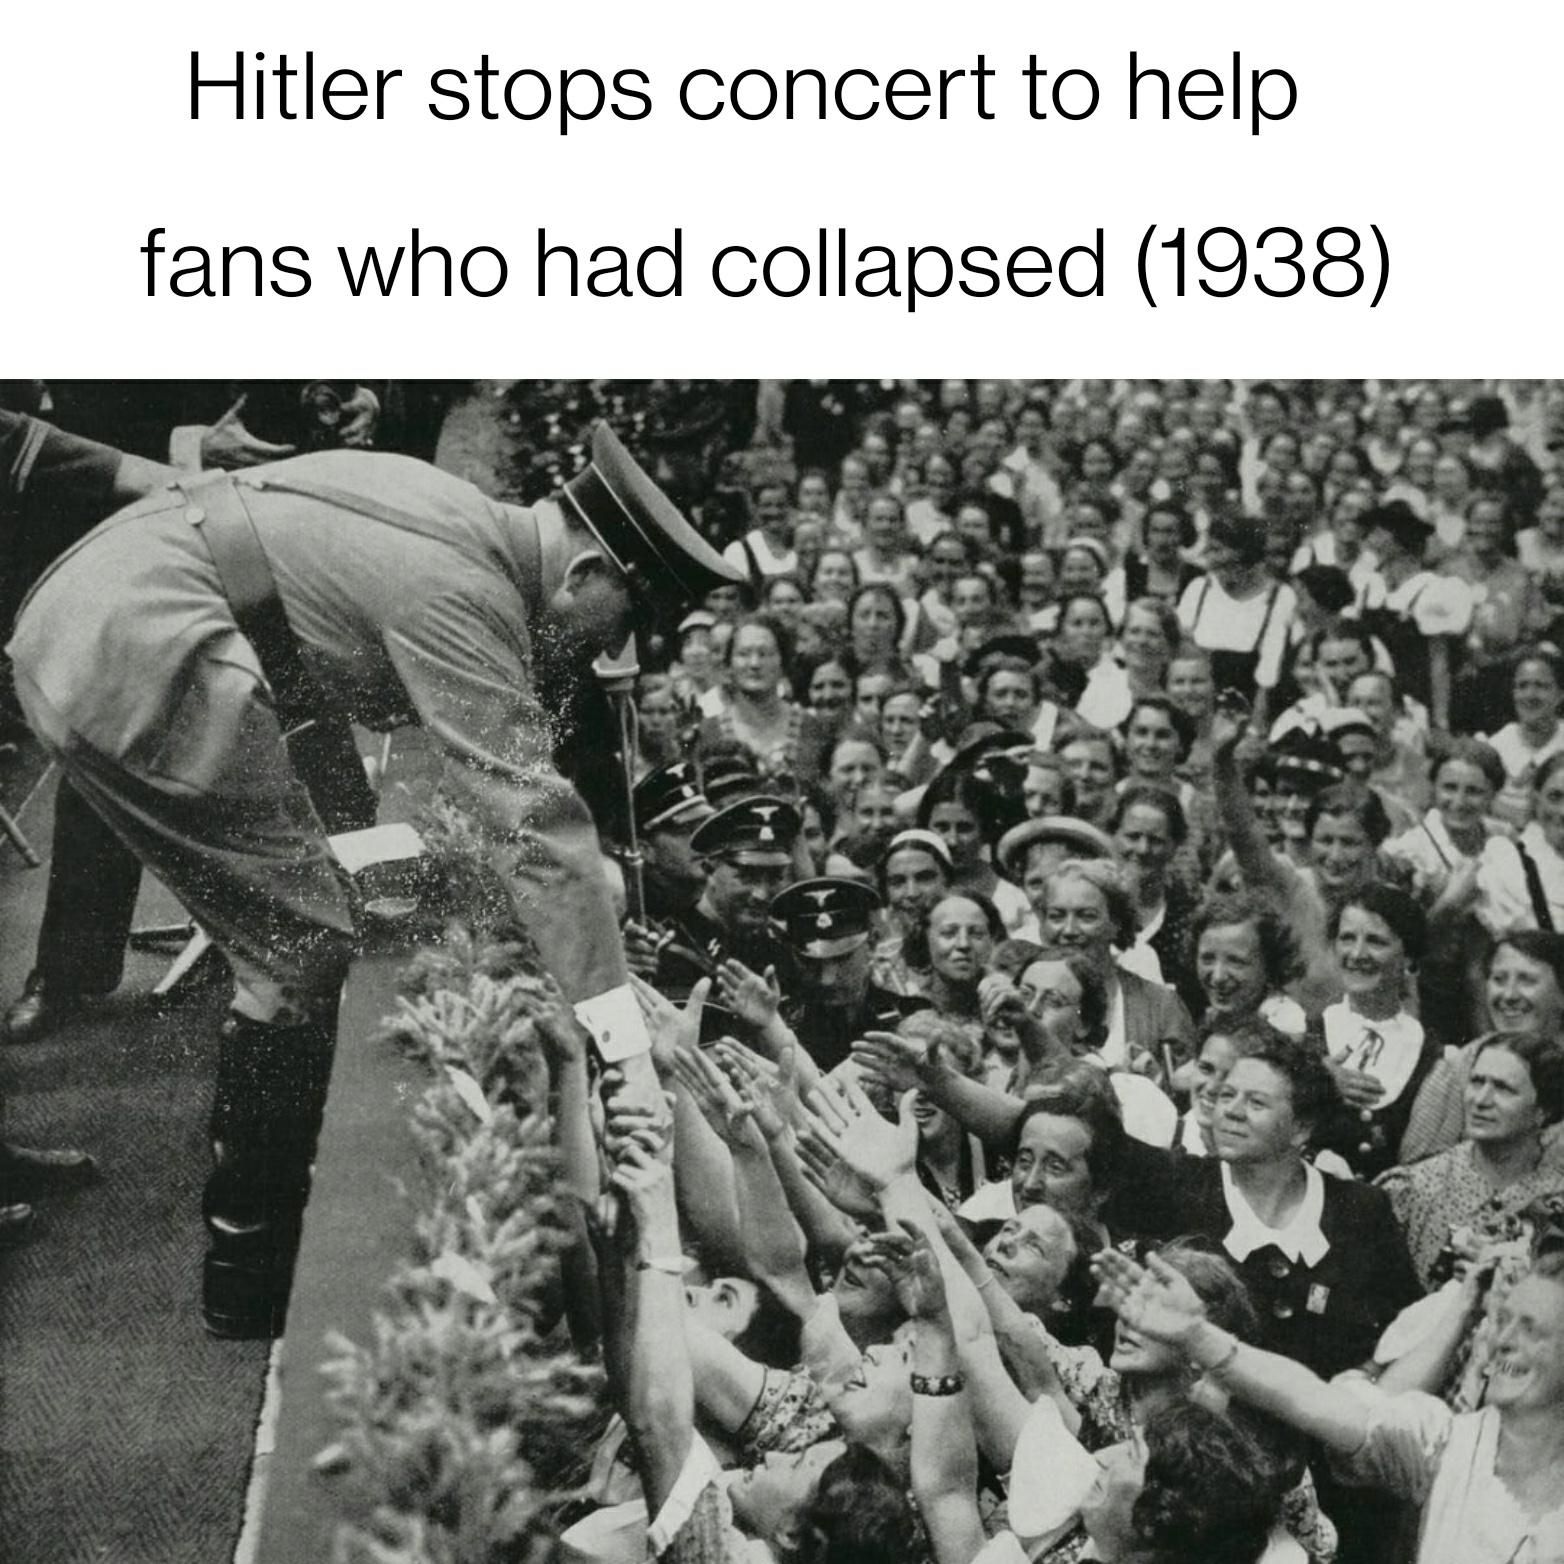 Hitler stops concert to help fans who had collapsed